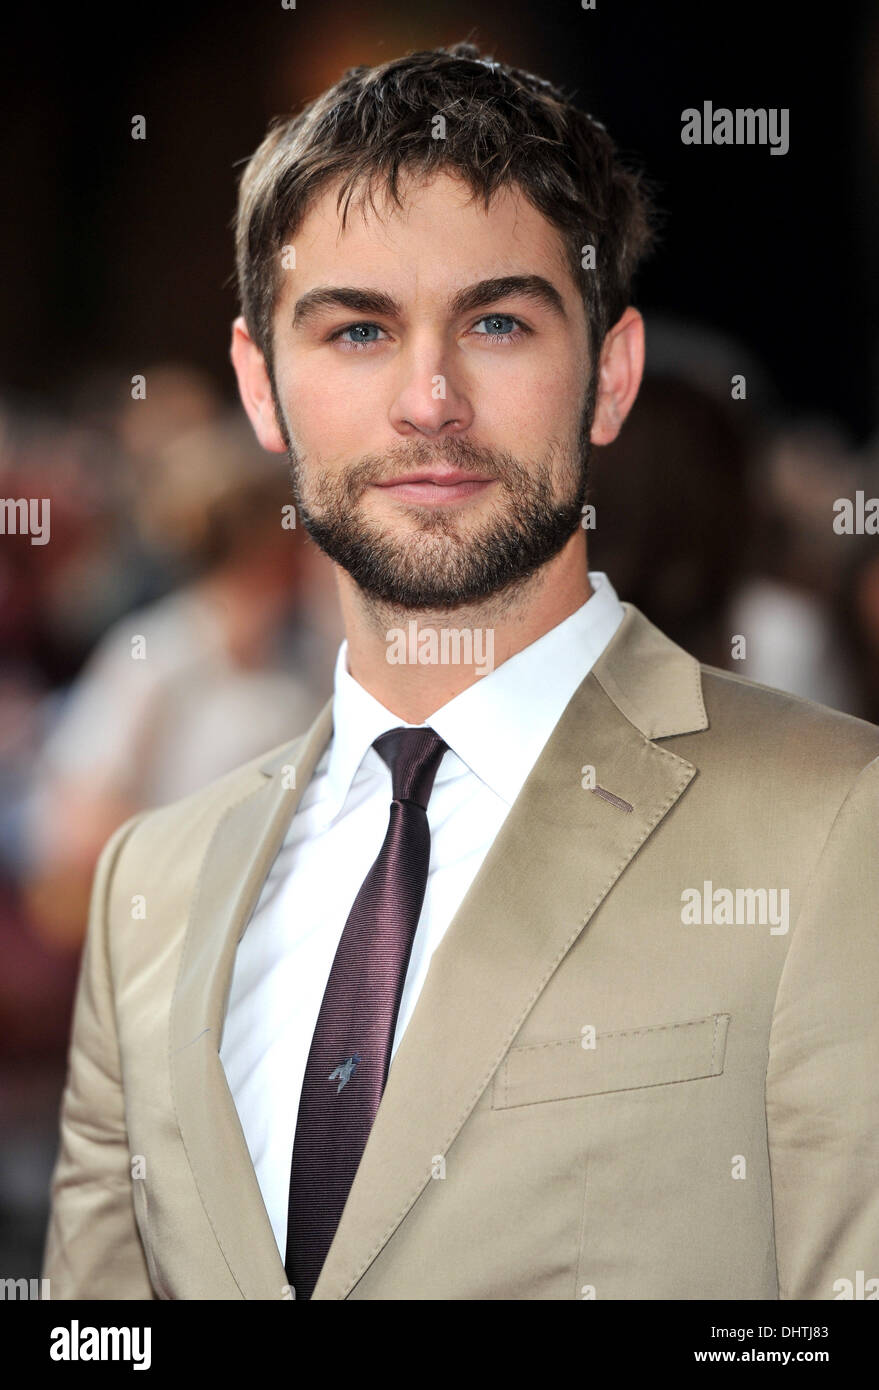 Chace Crawford What To Expect When Your're Expecting - European Premiere held at the BFI Imax - Arrivals. London, England - 22.05.12 Stock Photo